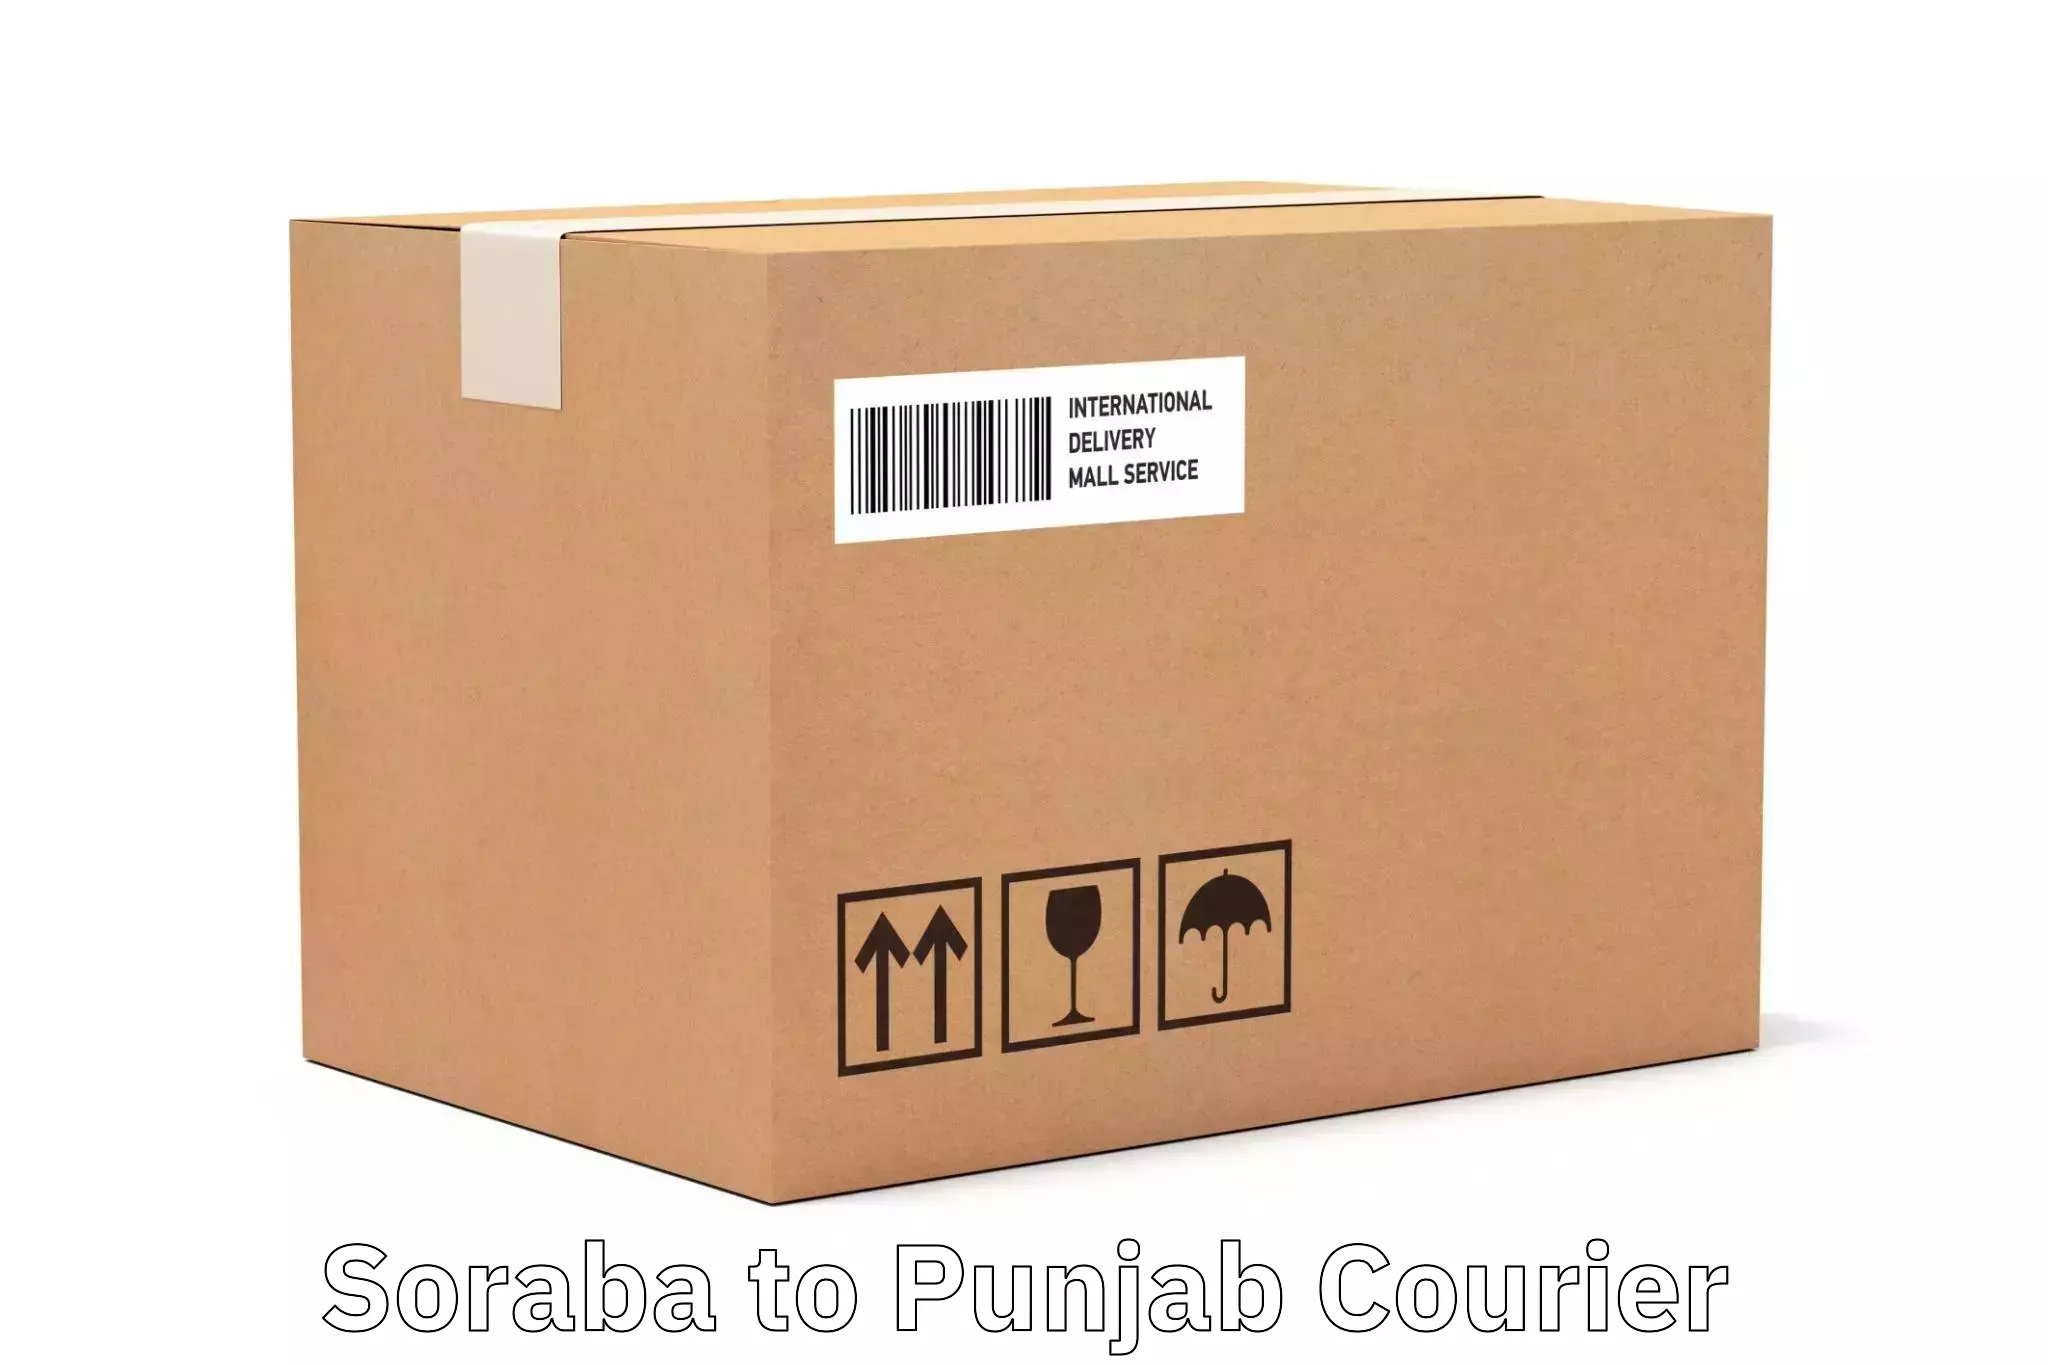 Efficient courier operations Soraba to Punjab